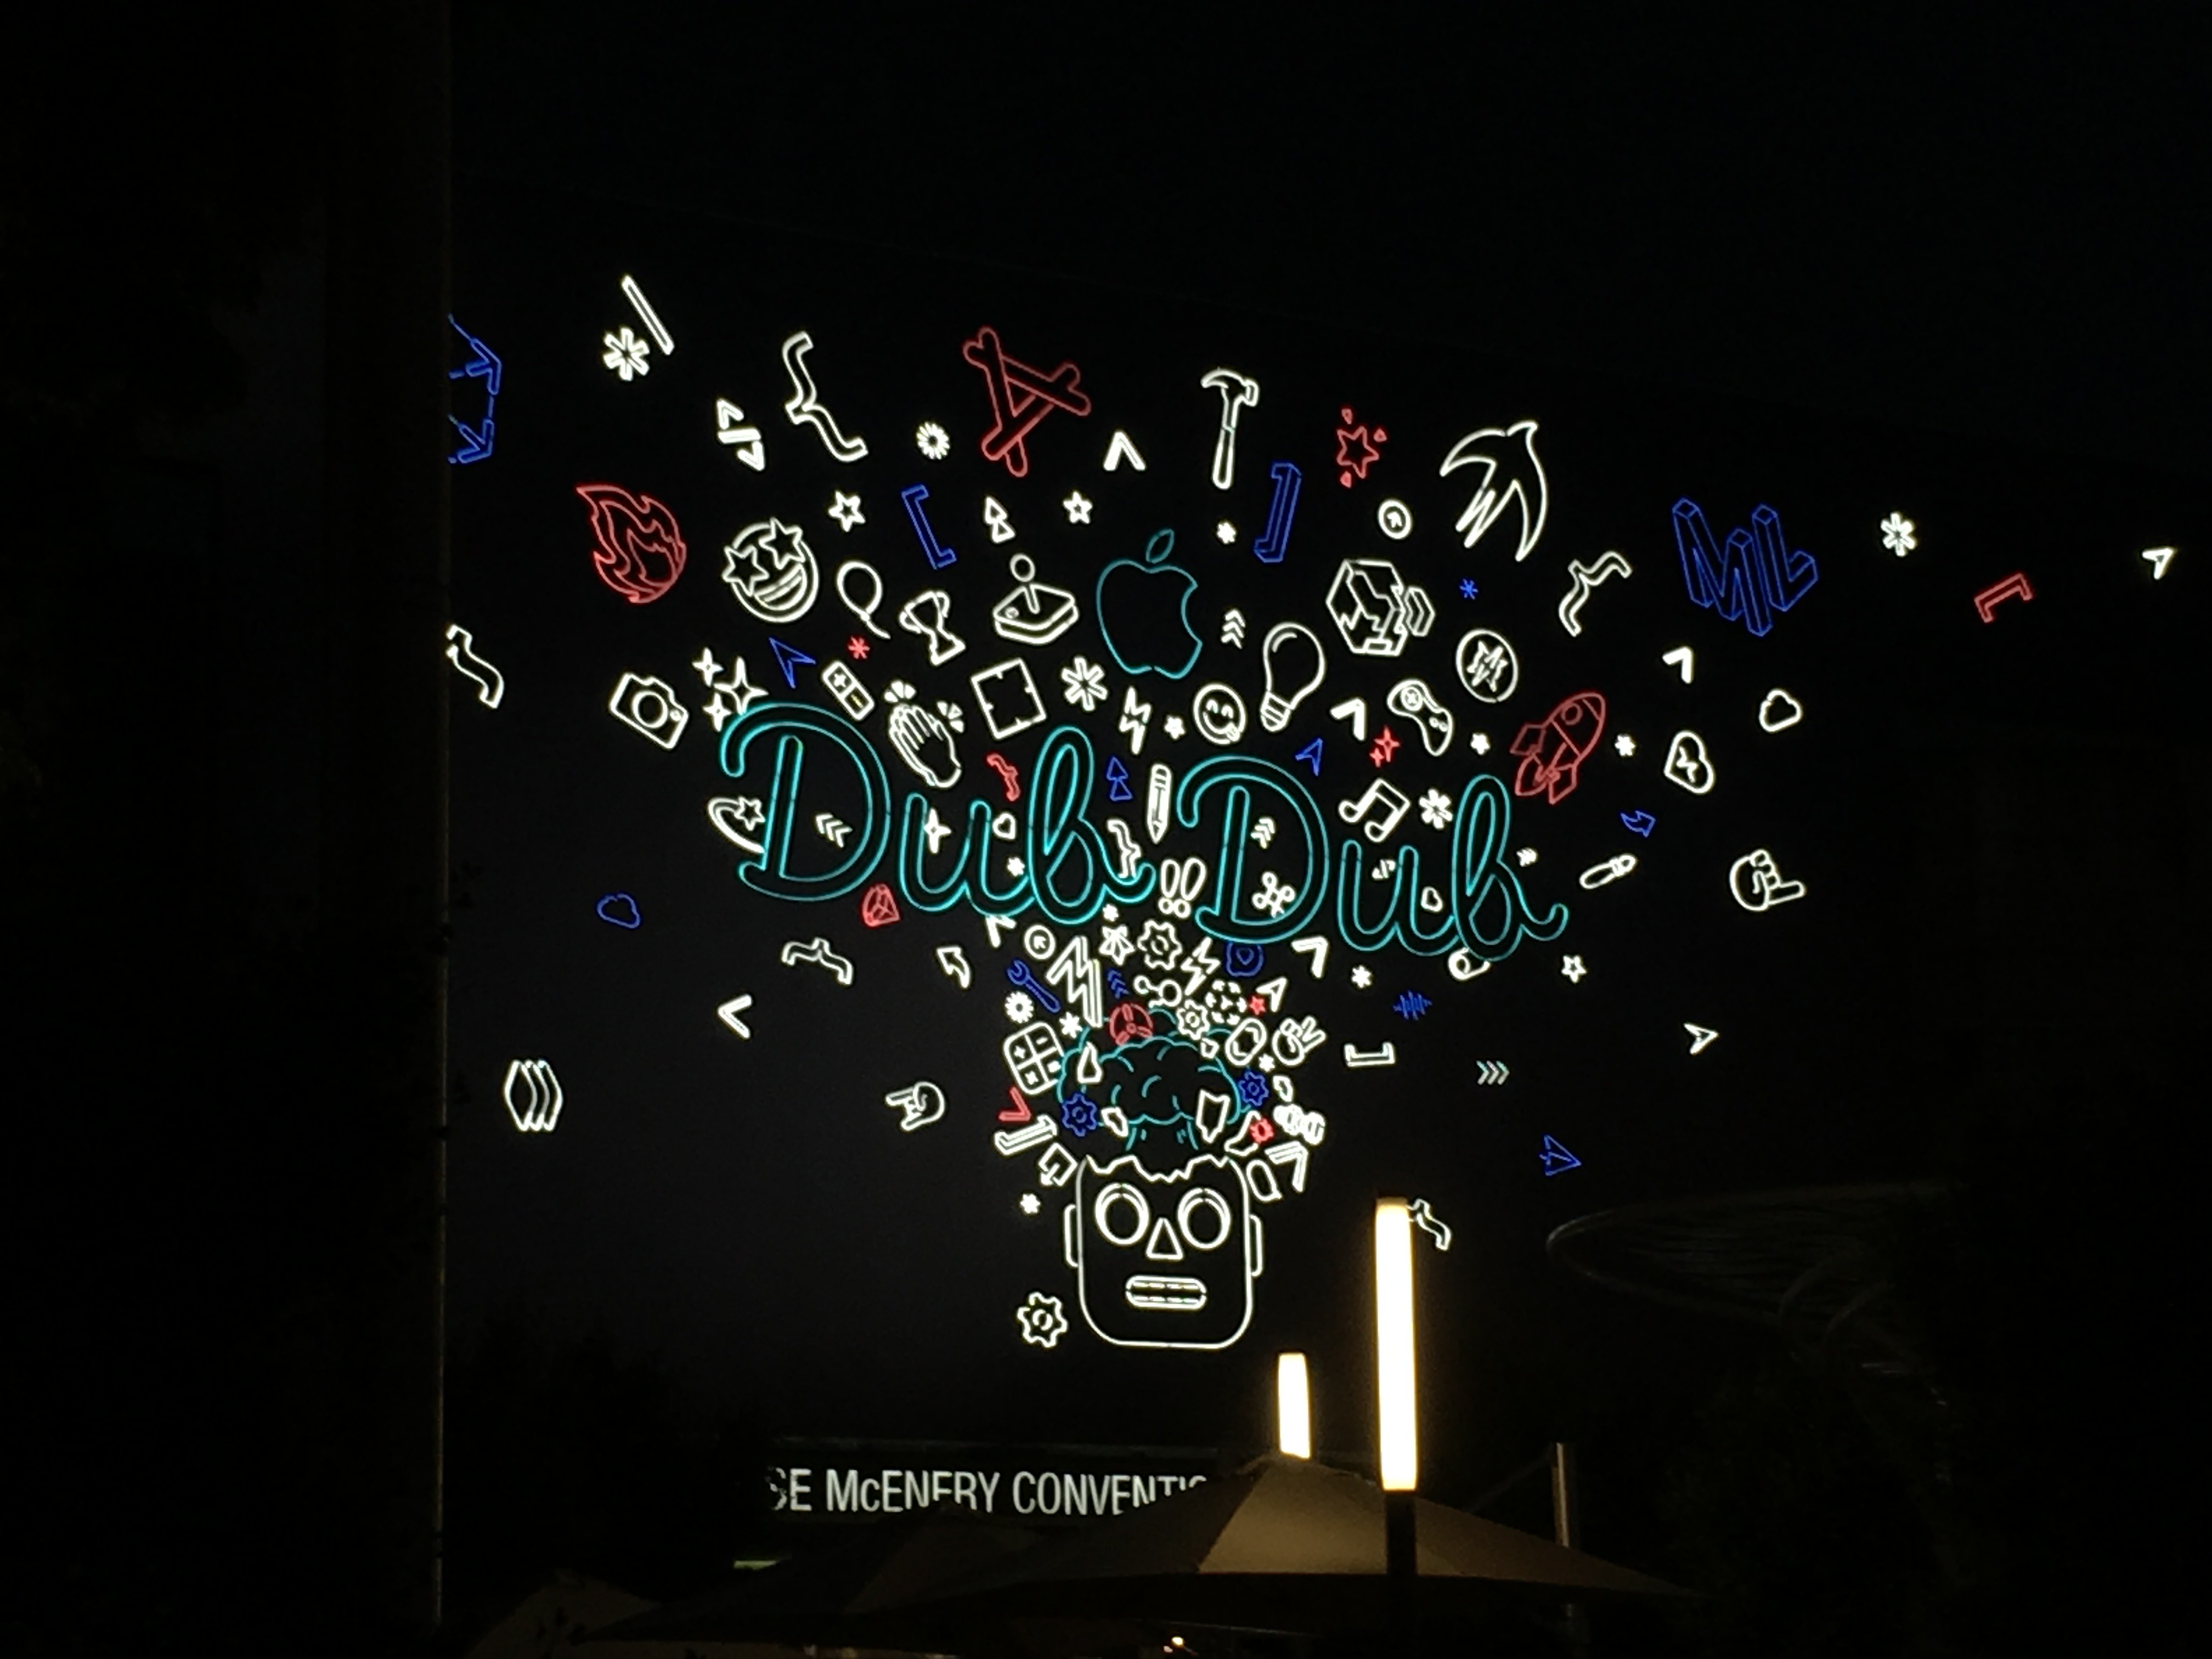 McEnery Convention Center lit up with a huge WWDC19 banner